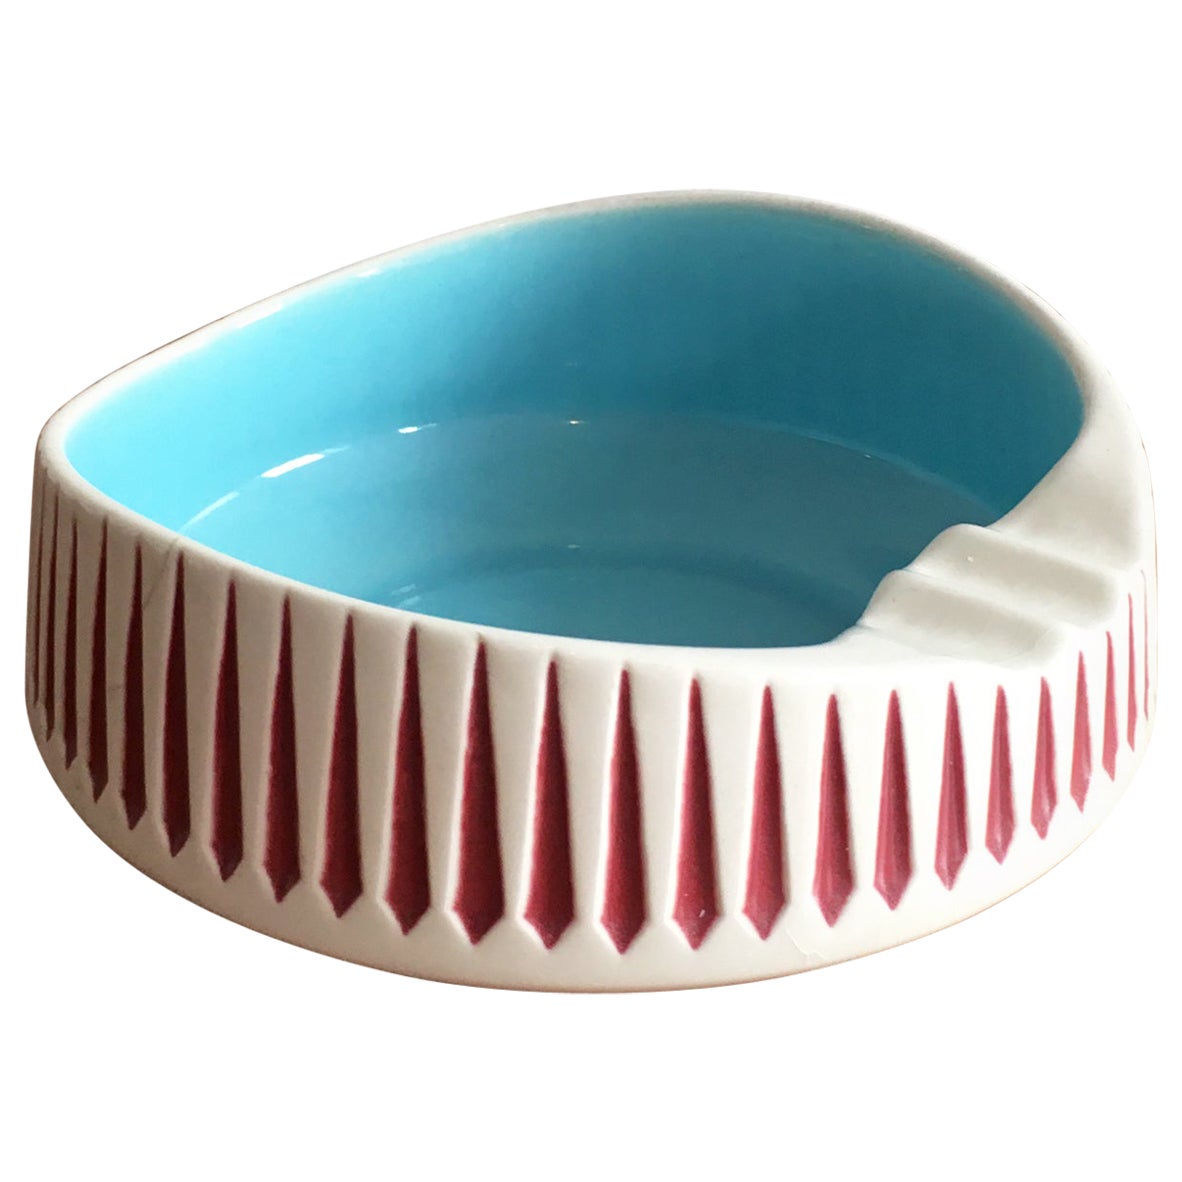 Hornsea Pottery Midcentury Ashtray Catchall in White and Aqua by John Clappison